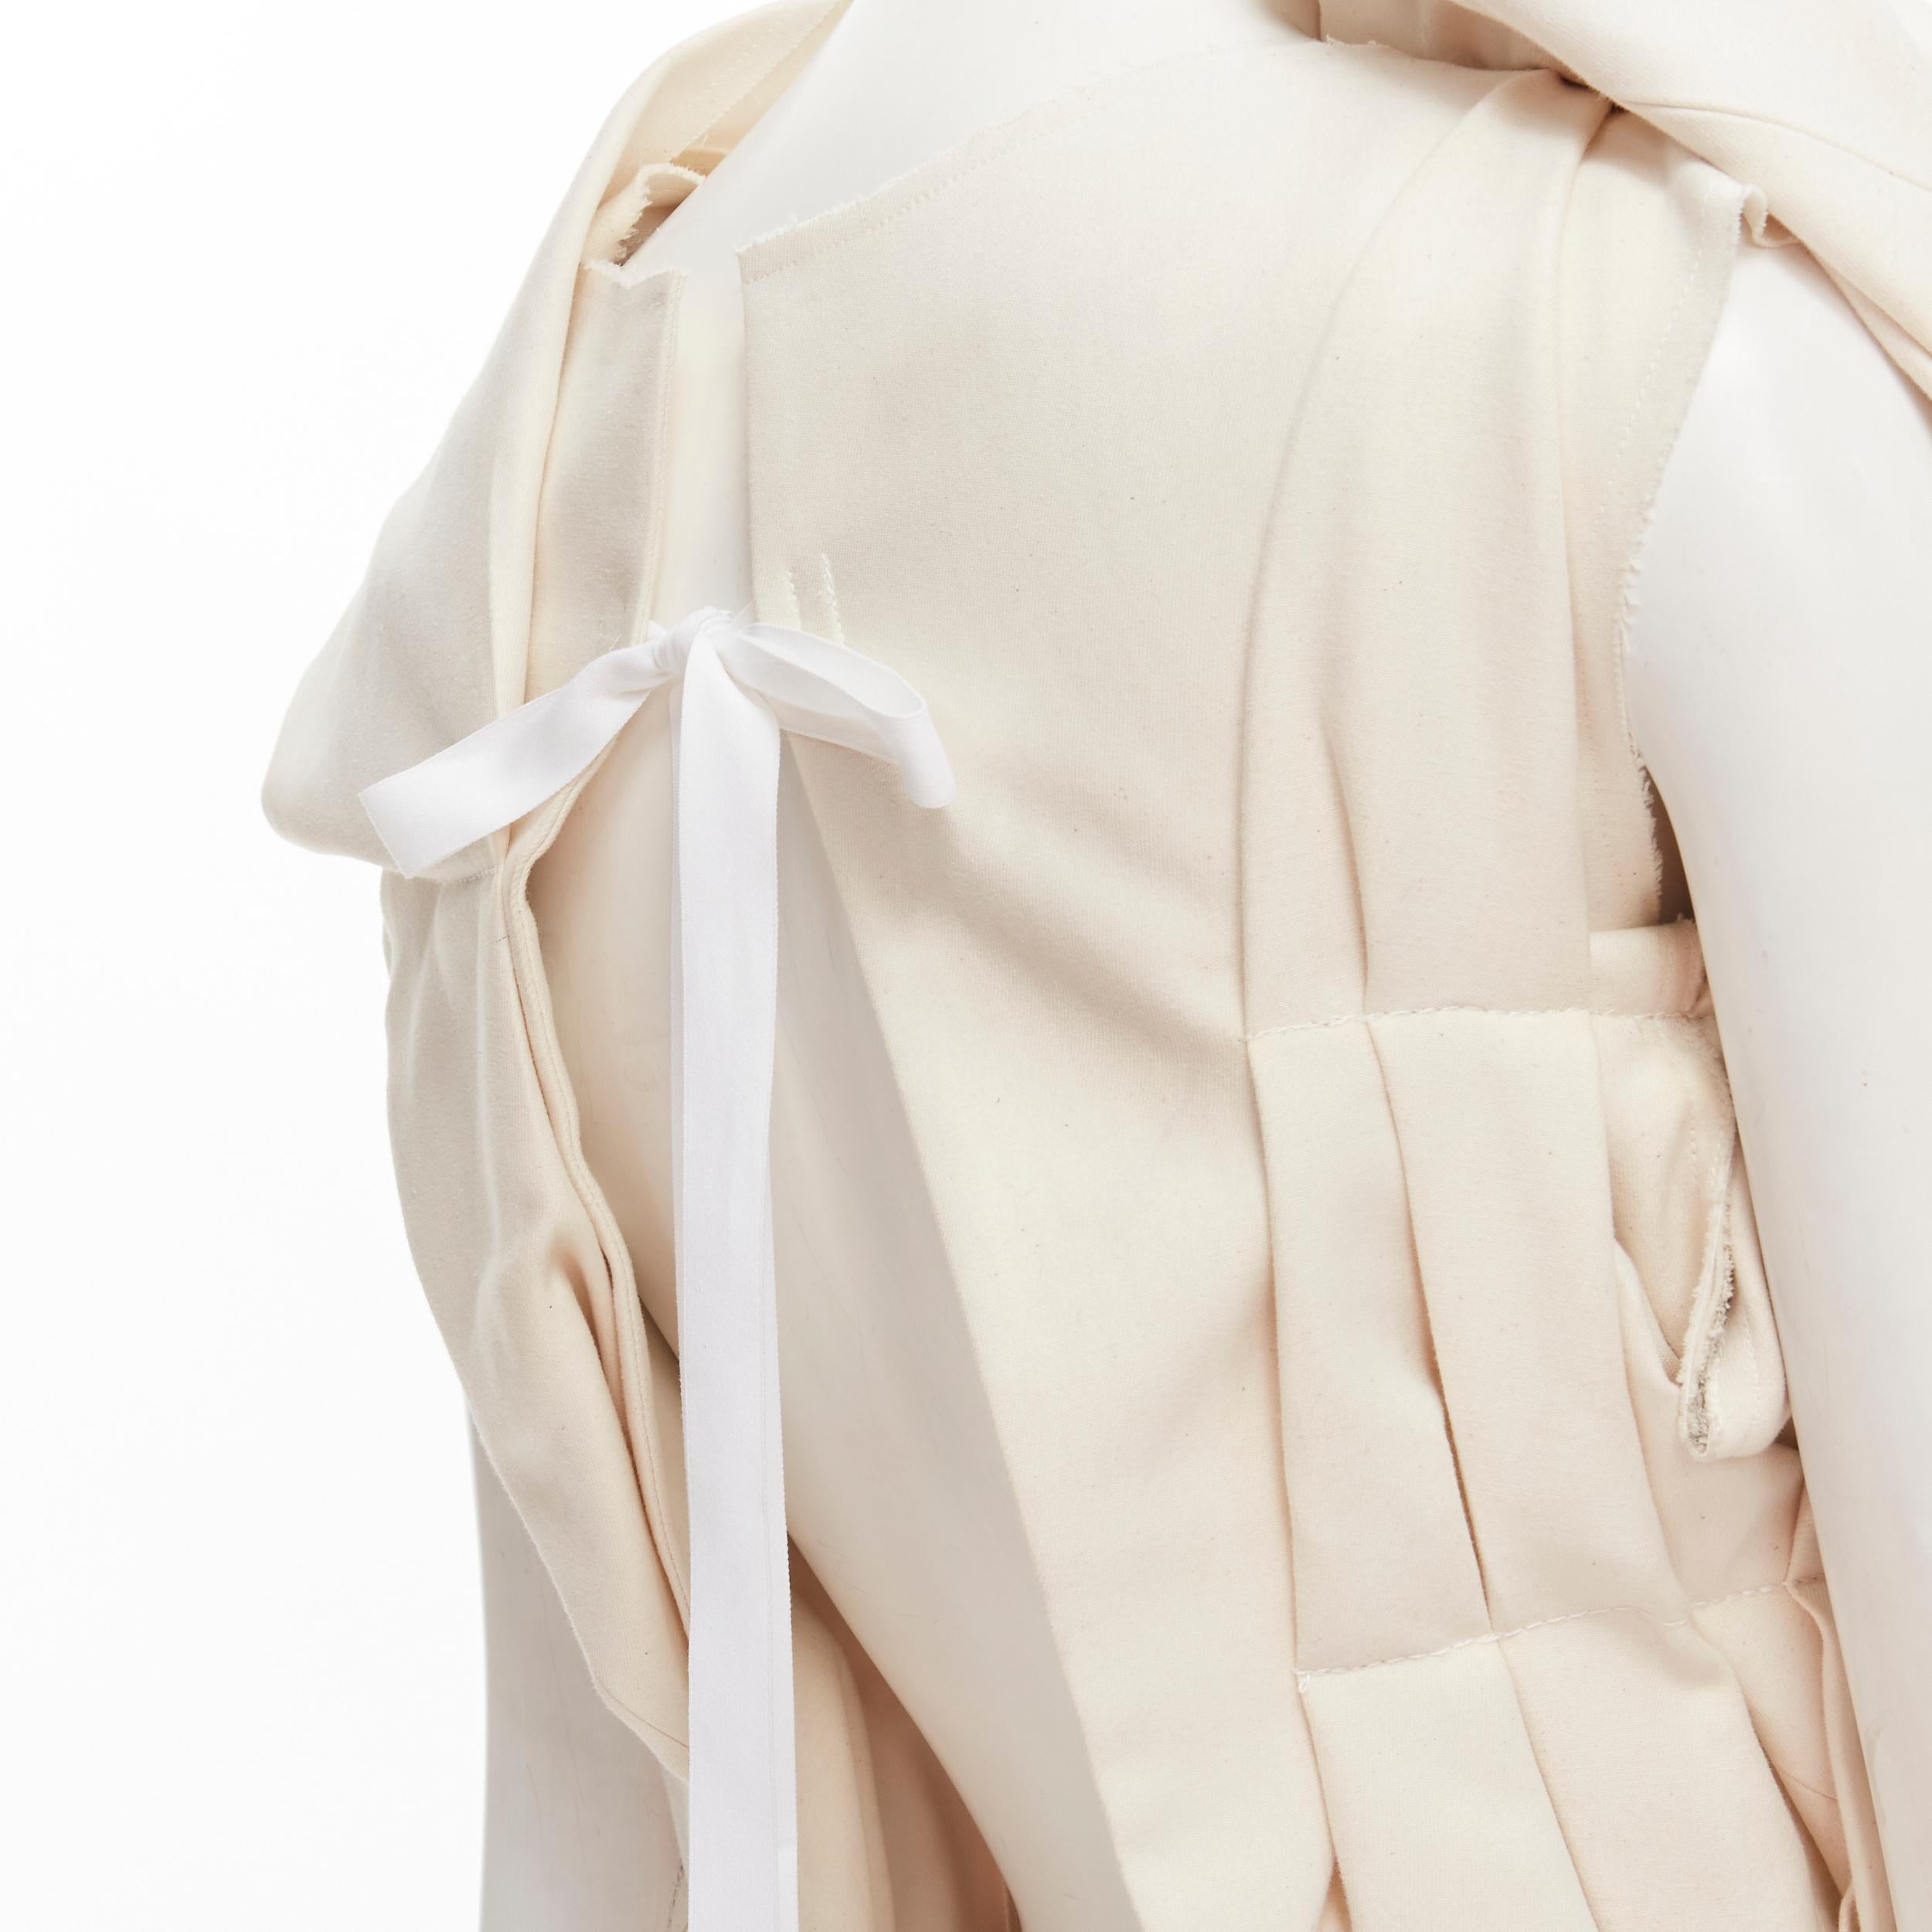 COMME DES GARCONS 2013 Runway beige cotton bundle gathered open tie back top S 
Reference: CRTI/A00692 
Brand: Comme Des Garcons 
Designer: Rei Kawakubo 
Collection: 2013 Runway 
Material: Cotton 
Color: Beige 
Pattern: Solid 
Closure: Tie 
Extra